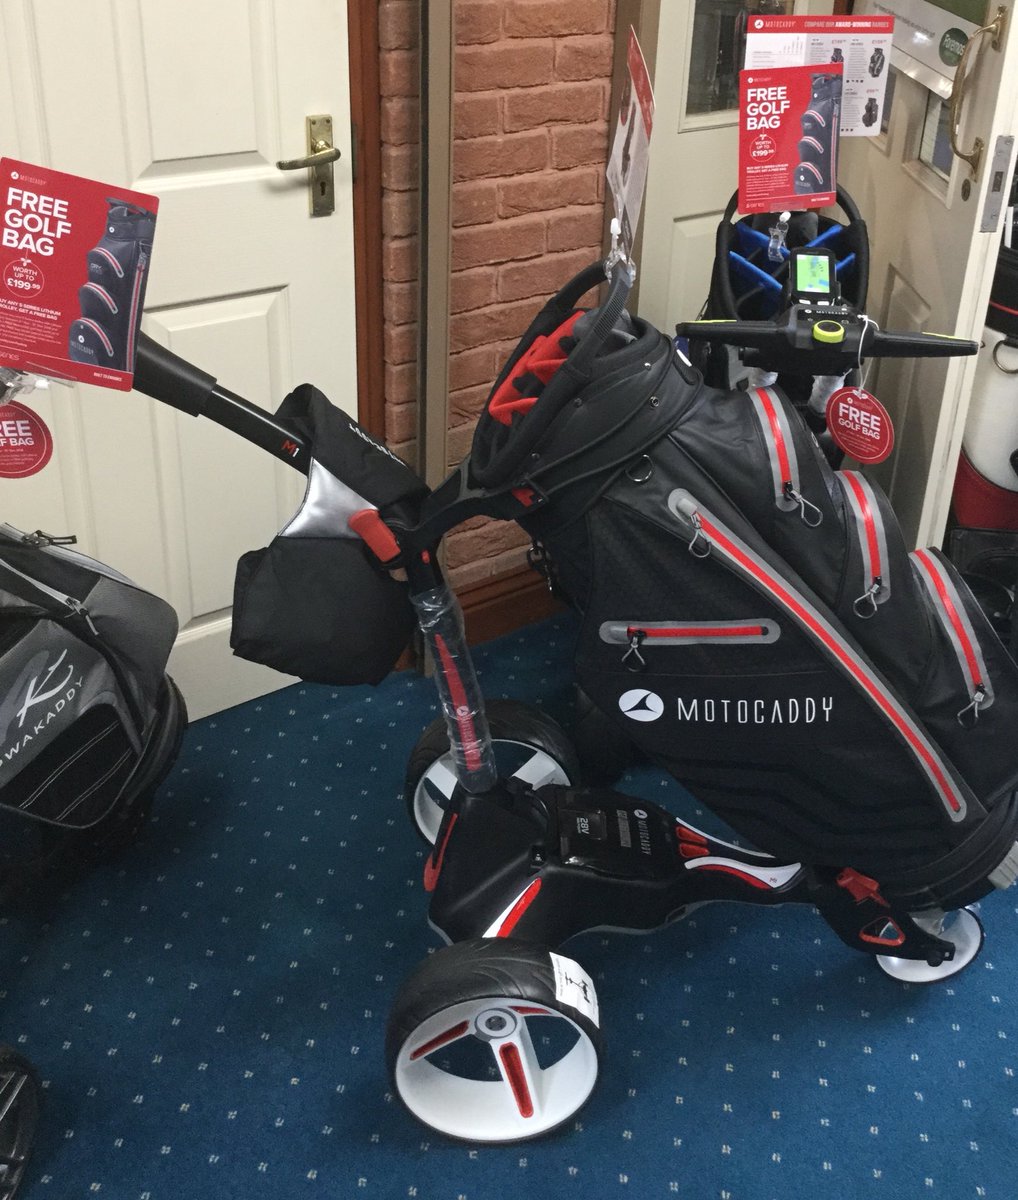 Free bag offer from Motocaddy  just  in time for Christmas #golf#electrictrolley#bargain#motocaddy